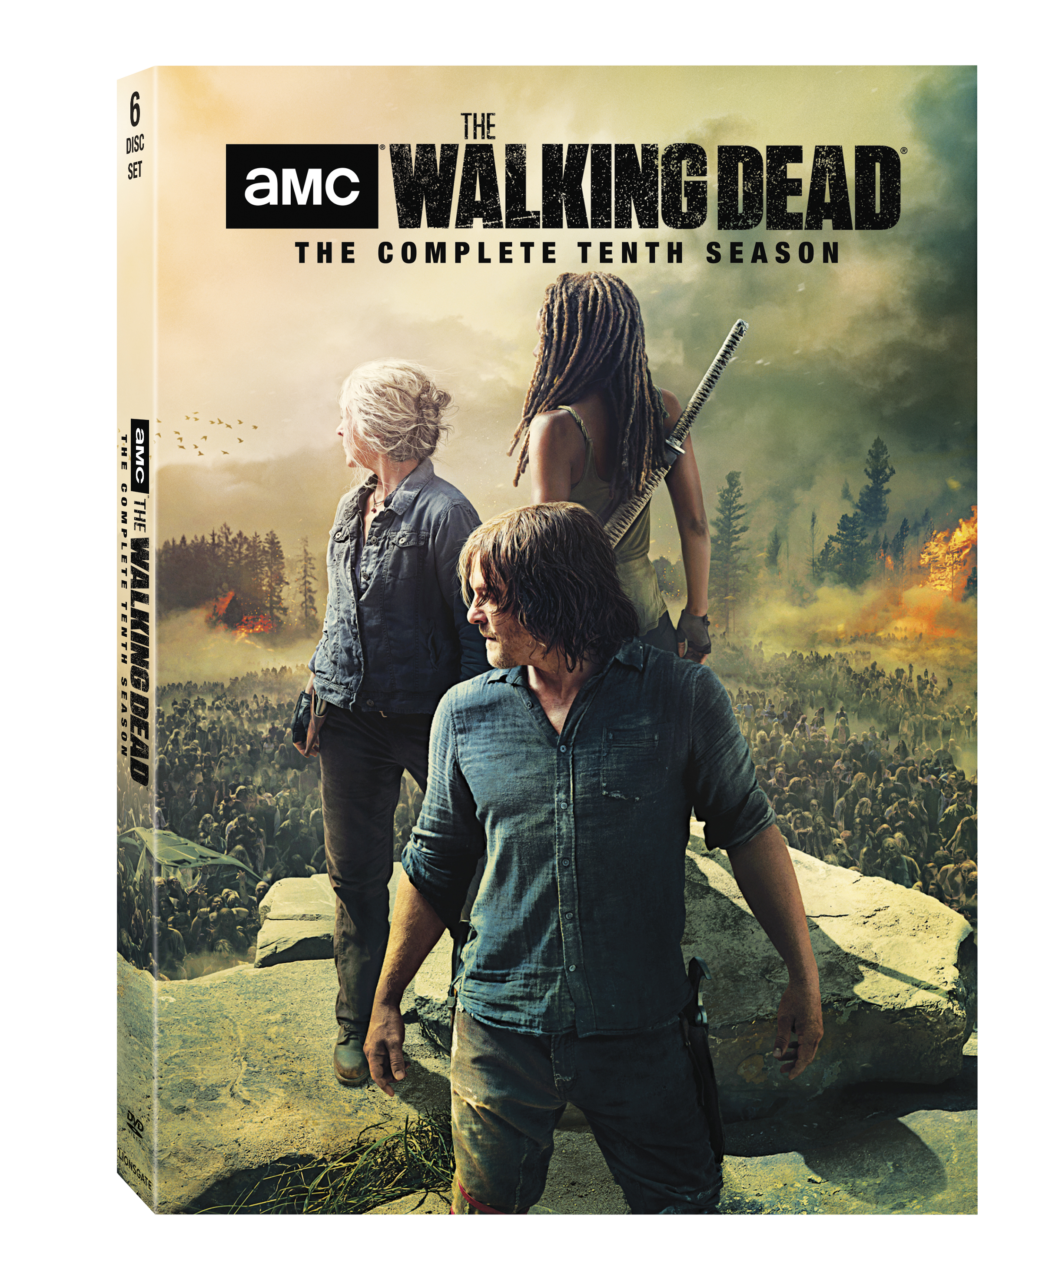 The Walking Dead: The Complete Tenth Season DVD cover (Lionsgate)